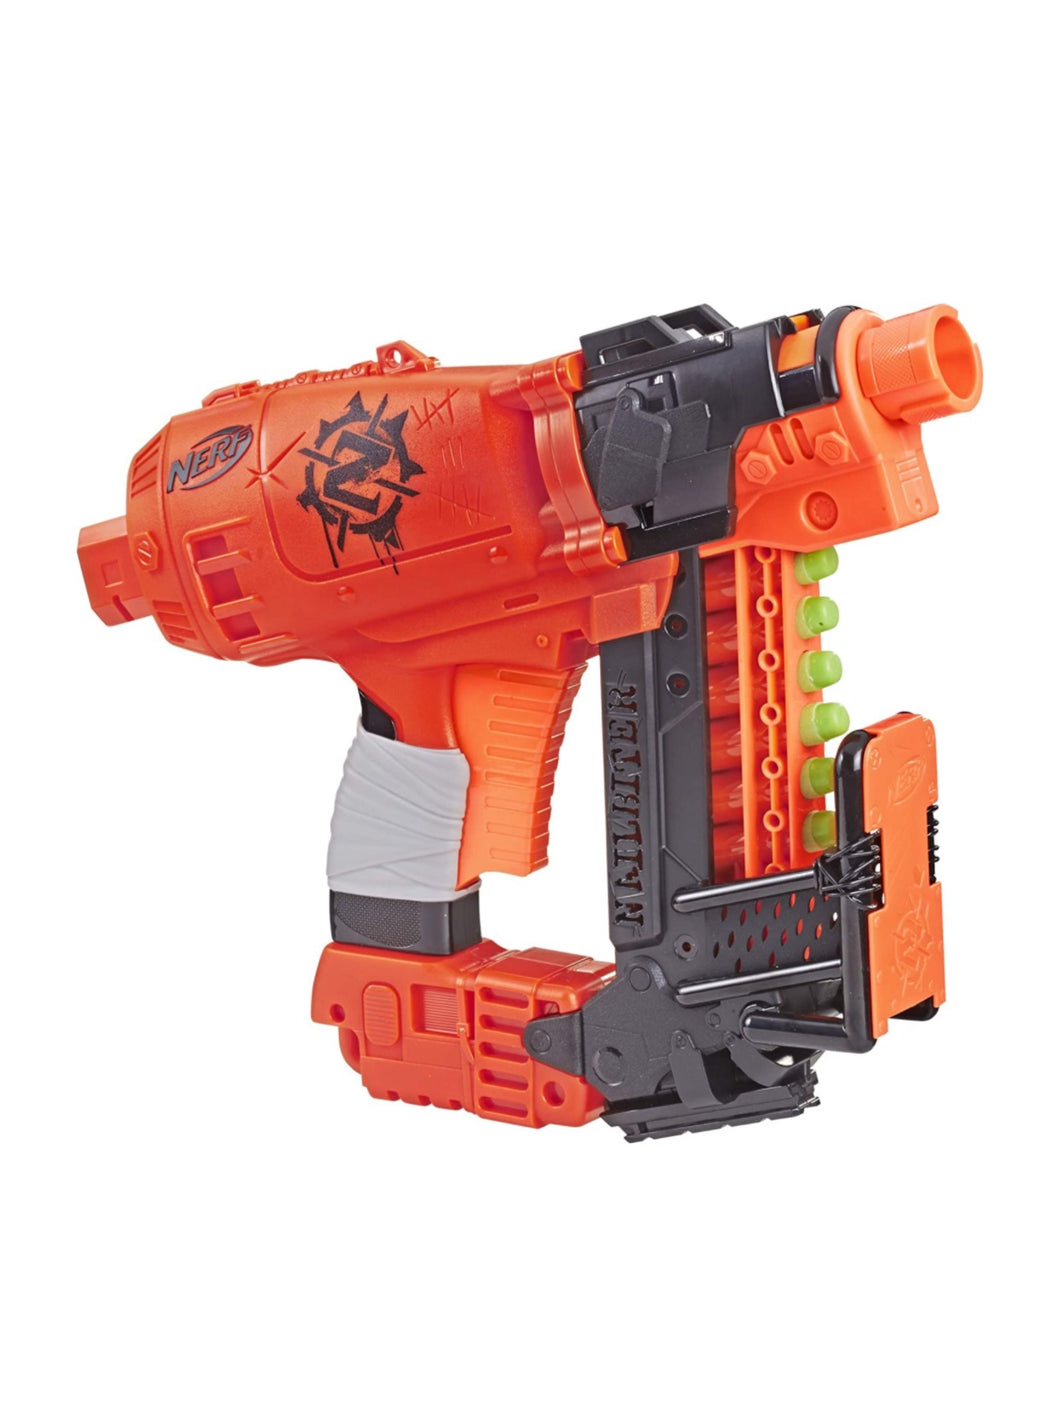 NERF Nailbiter Zombie Strike Toy Blaster, 8 Official Zombie Strike Elite Darts, 8-Dart Indexing Clip, Survival System, for Kids Ages 8 and up,Plastic,Multicolor